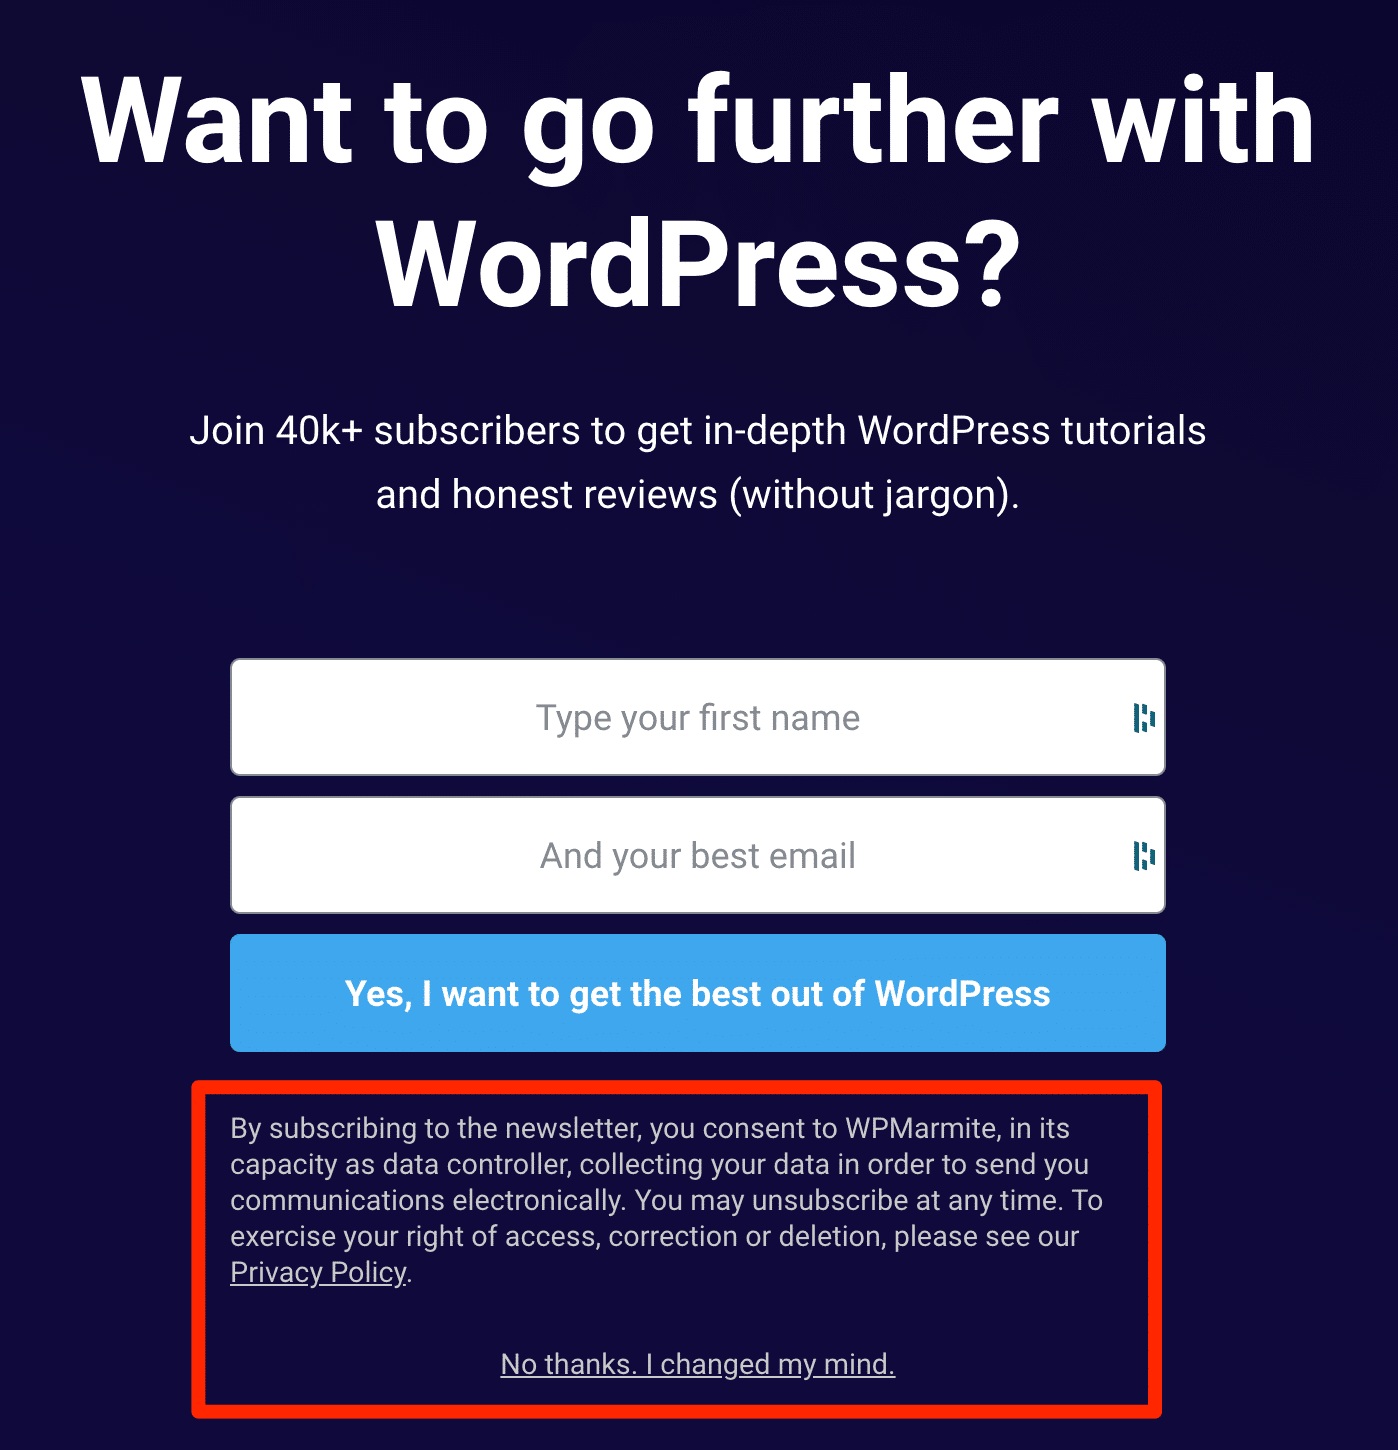 WPMarmite WordPress opt-in form referring to the privacy policy to provide more details on the various terms and conditions